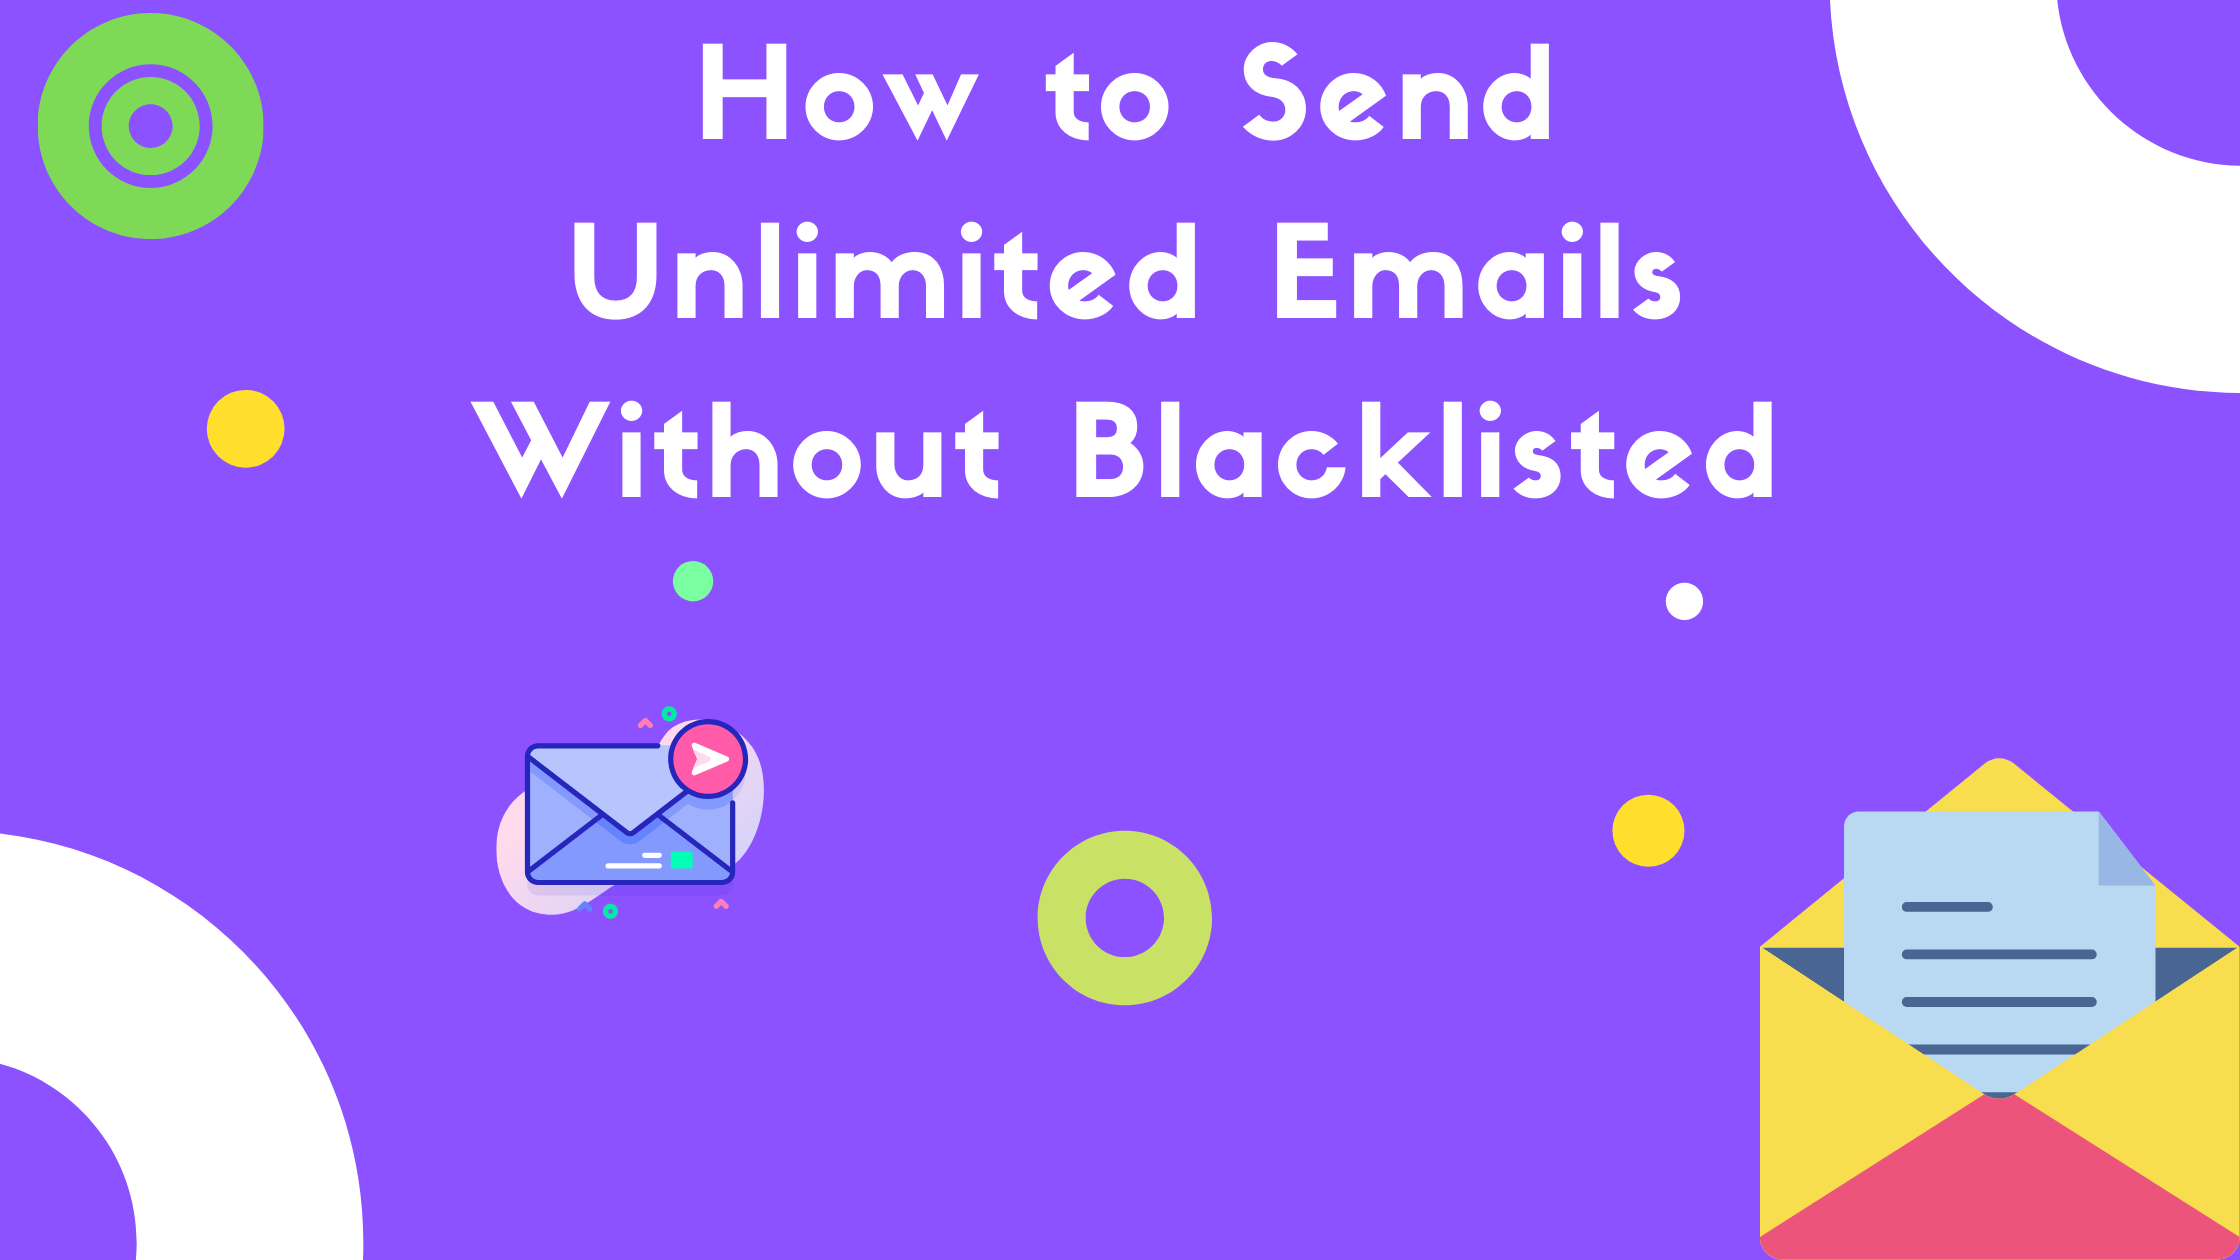 How to send unlimited emails without blacklisted